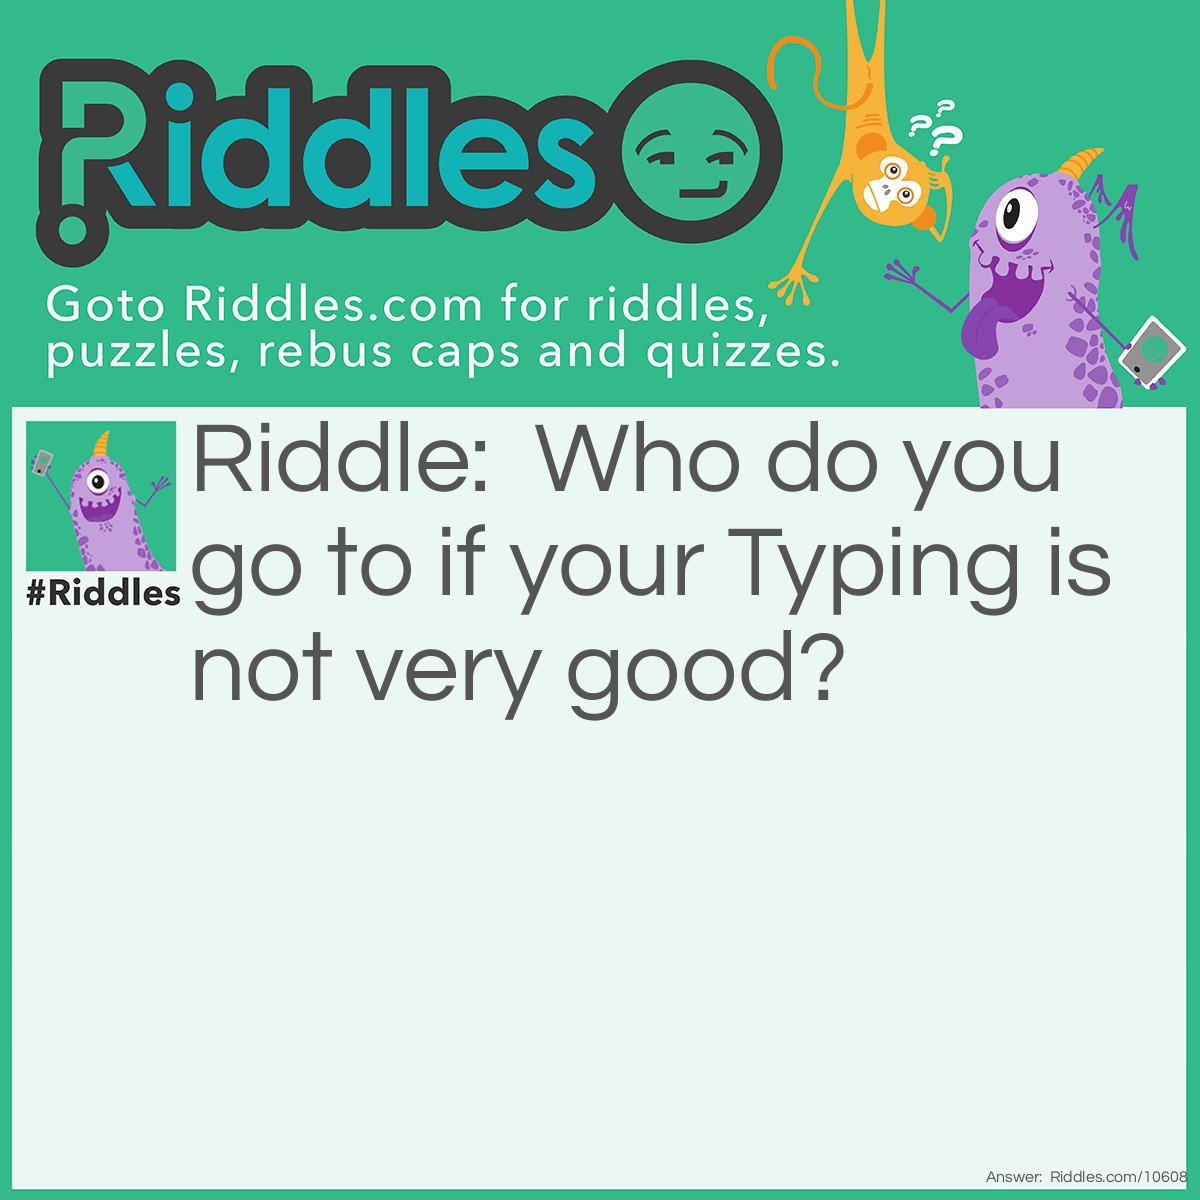 Riddle: Who do you go to if your Typing is not very good? Answer: The Type Righter.